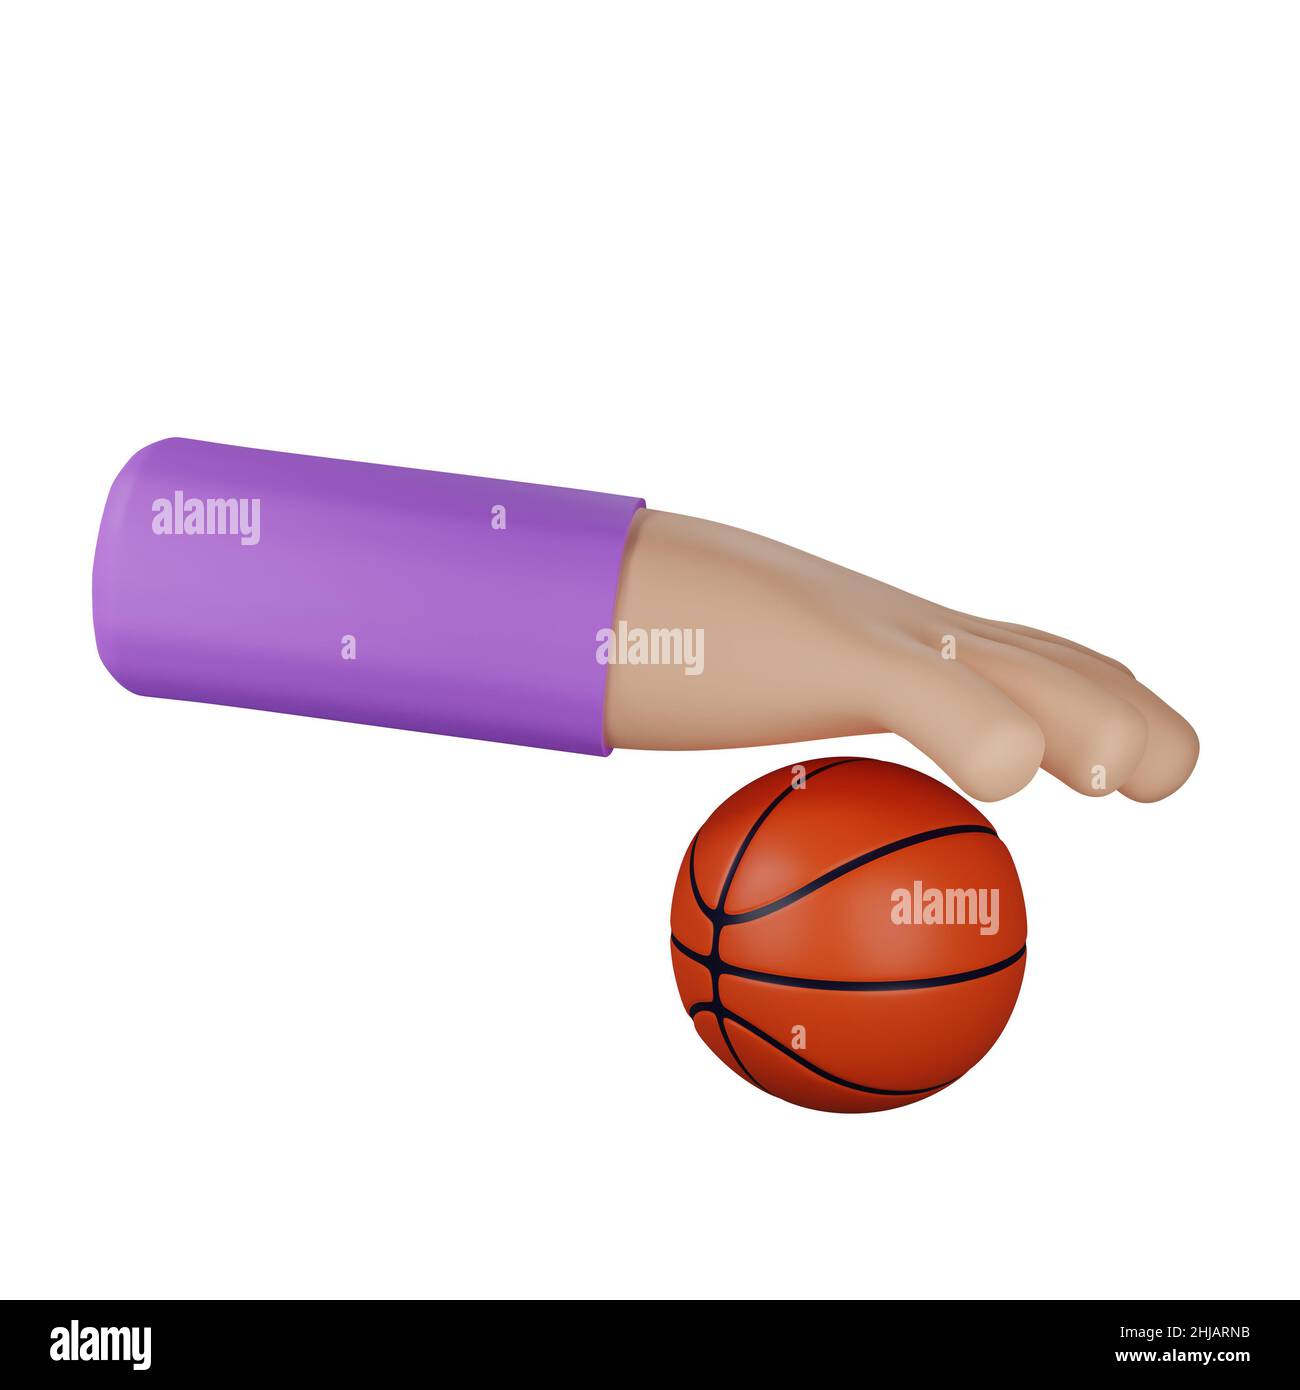 3d rendering of hands with basketball playing concept Stock Photo